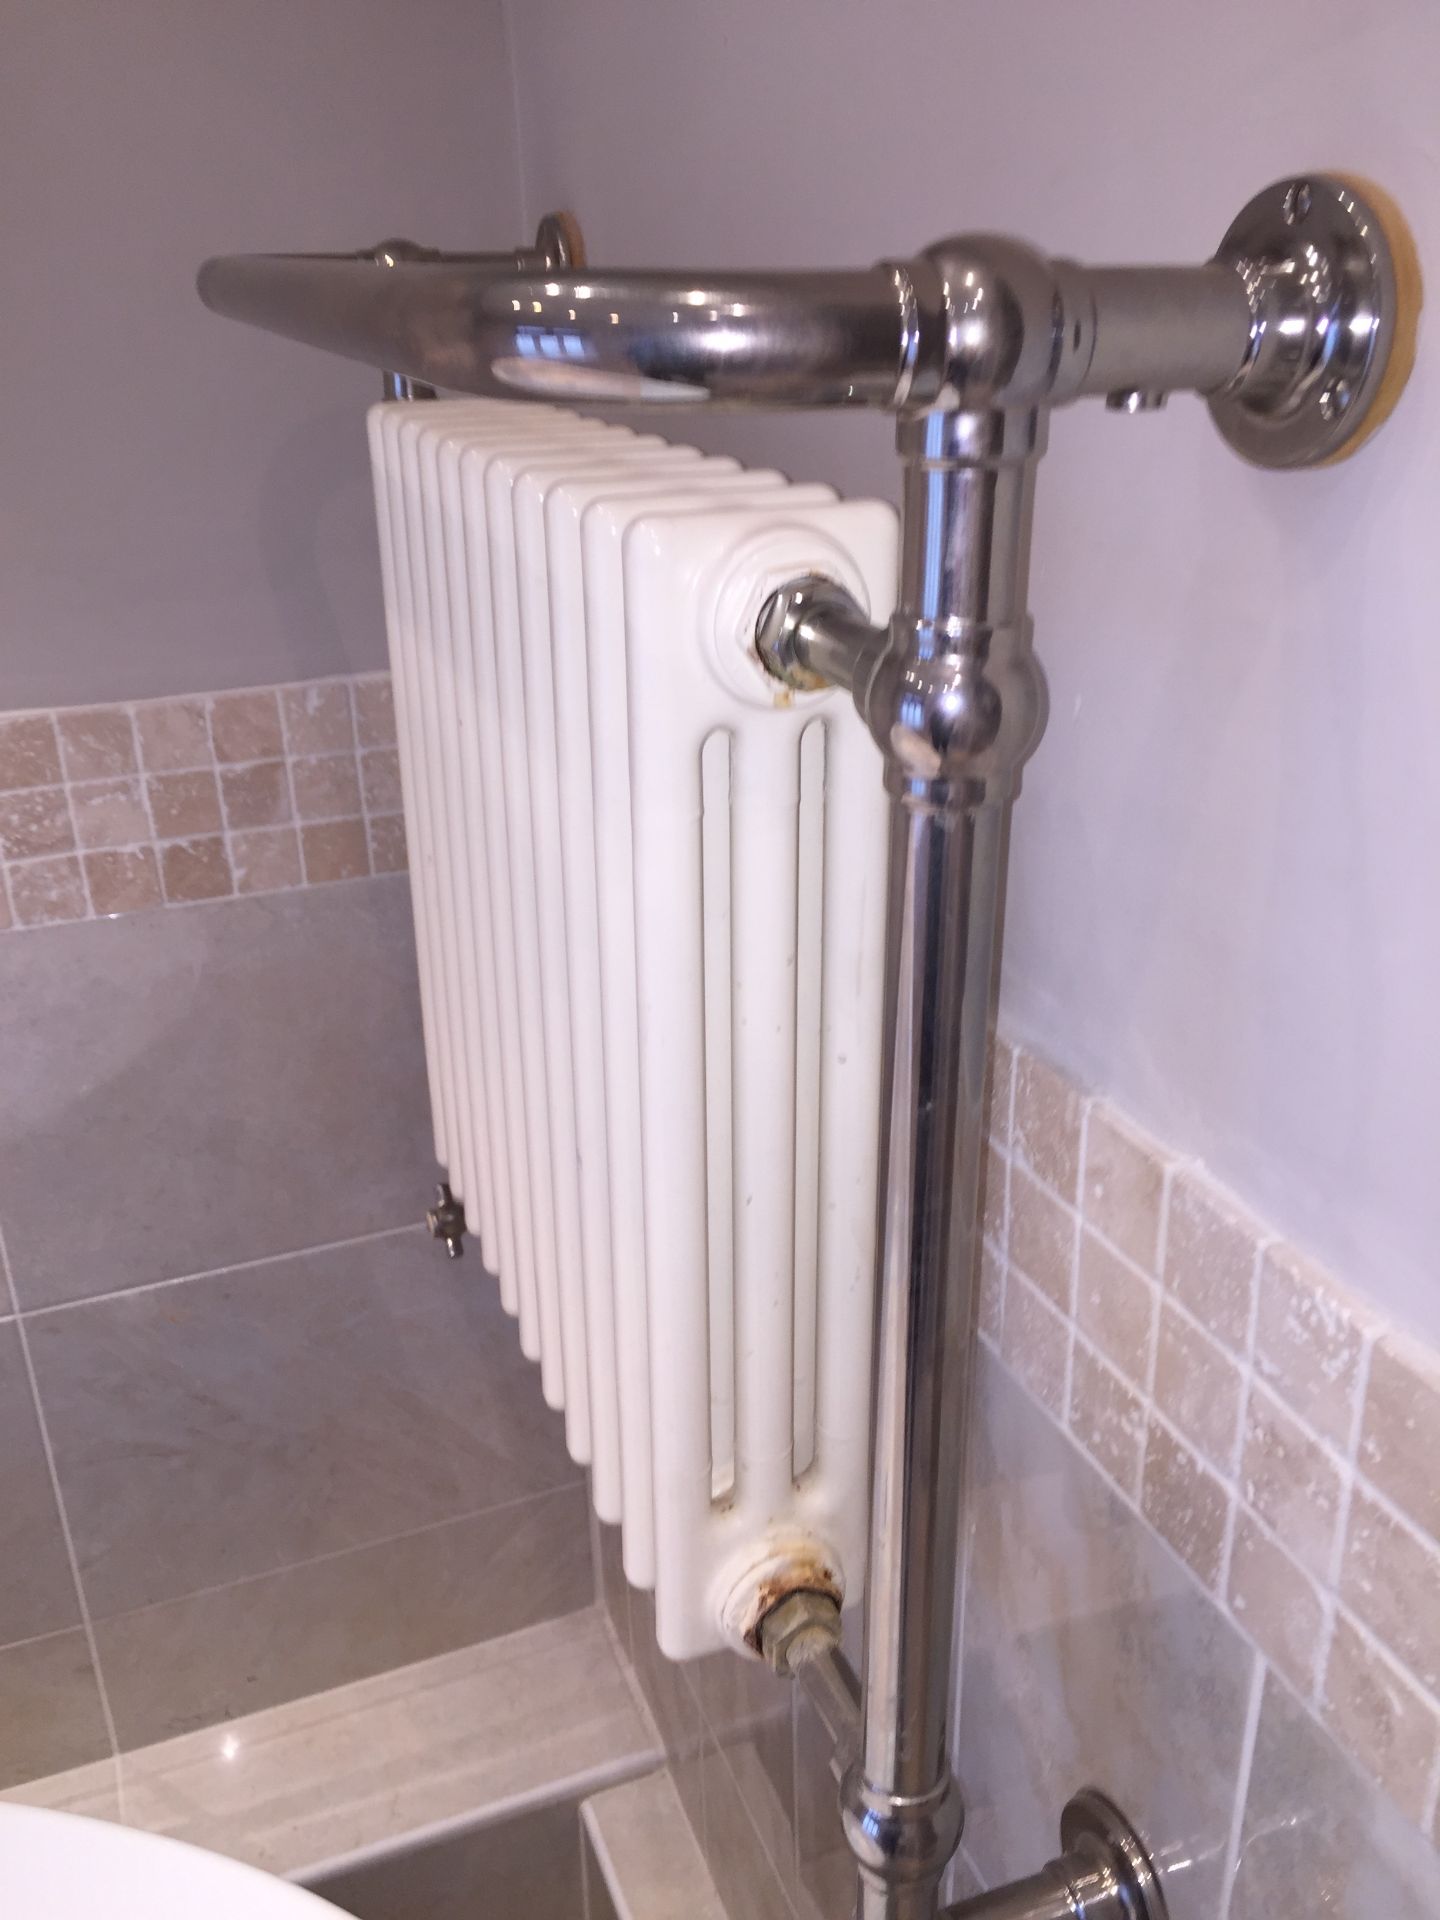 2 x Matching Radiators - Dimensions Width 80cm x Height 74cm x Depth 25cm - Preowned In Good - Image 5 of 6